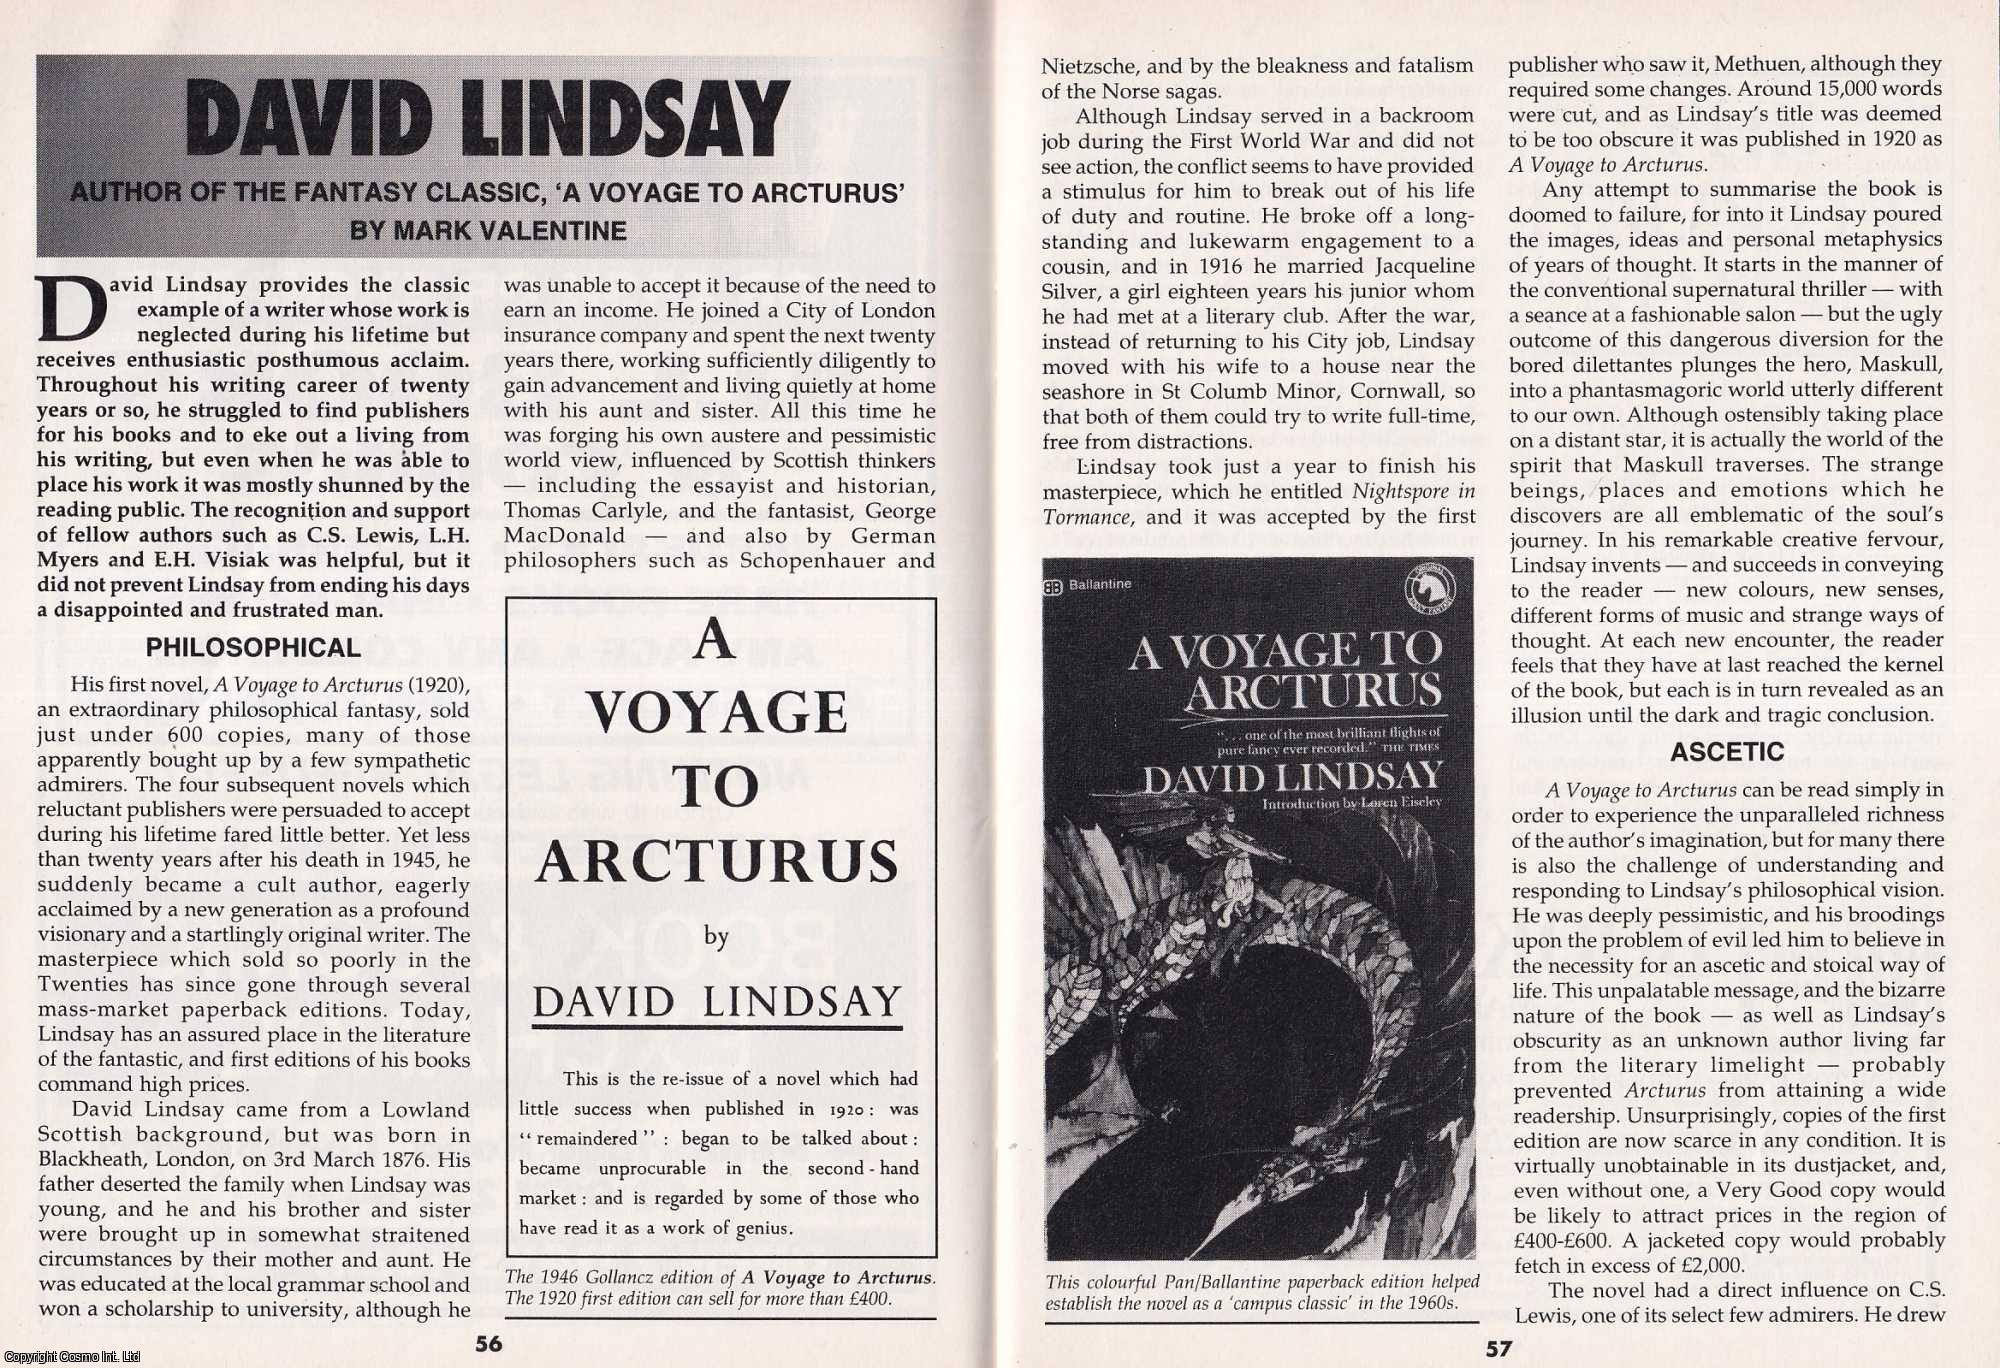 Mark Valentine - David Lindsay. Author of The Fantasy Classic A Voyage to Arcturus. This is an original article separated from an issue of The Book & Magazine Collector publication.